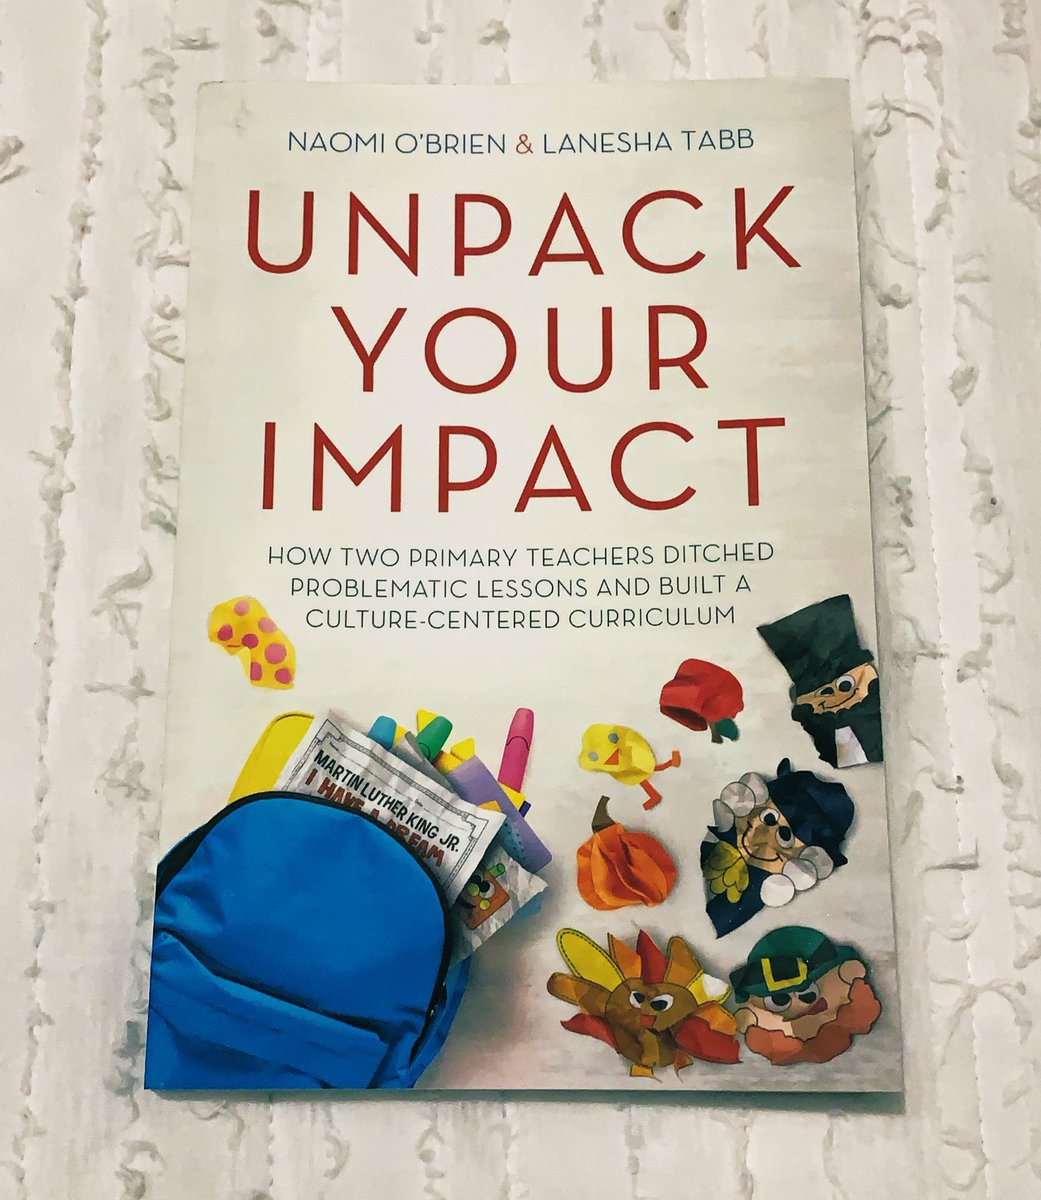 Another appropriate week to read and reflect with @apron_education #UnpackYourImpact @dbc_inc #HardHistory #CriticalConversations #WorkinProgress